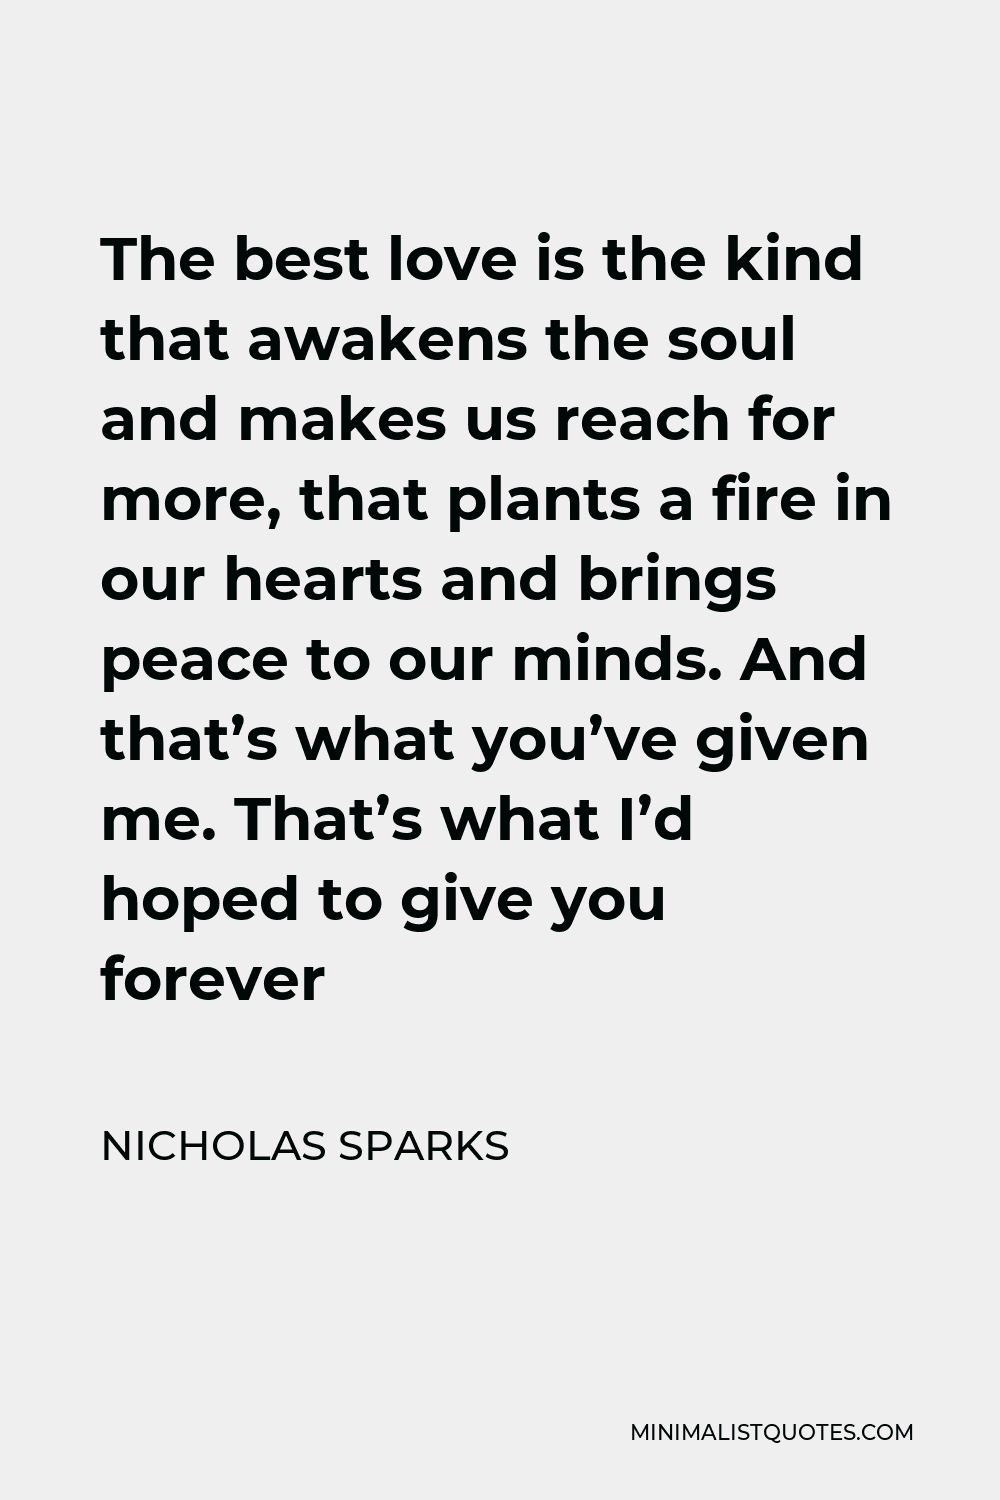 Nicholas Sparks Quote - The best love is the kind that awakens the soul and makes us reach for more, that plants a fire in our hearts and brings peace to our minds. And that’s what you’ve given me. That’s what I’d hoped to give you forever